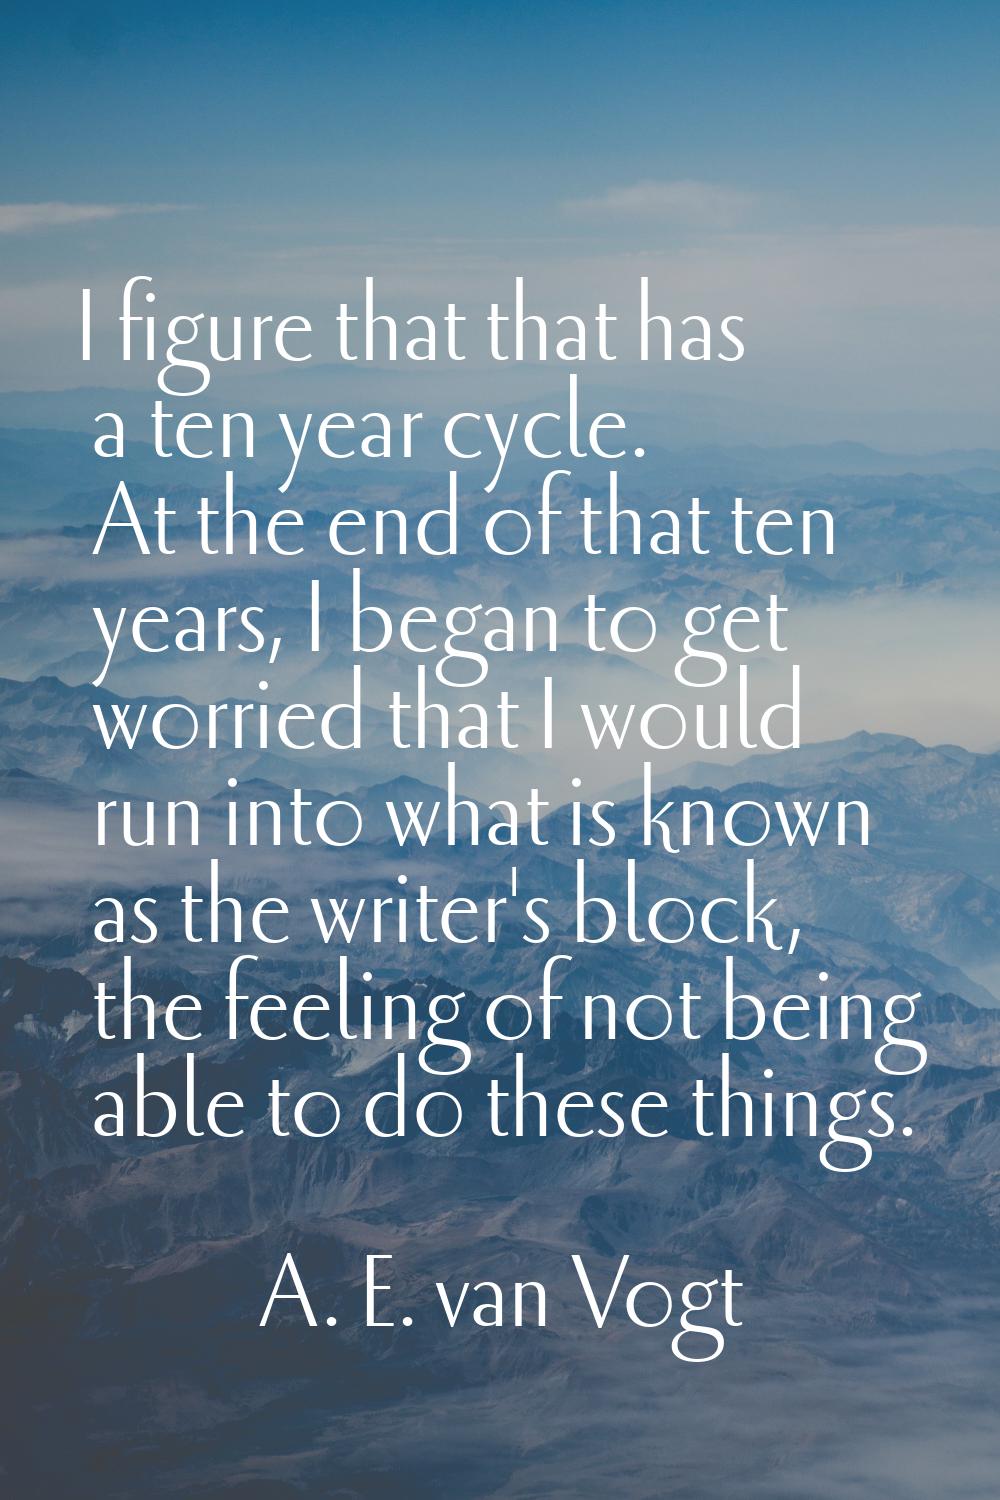 I figure that that has a ten year cycle. At the end of that ten years, I began to get worried that 